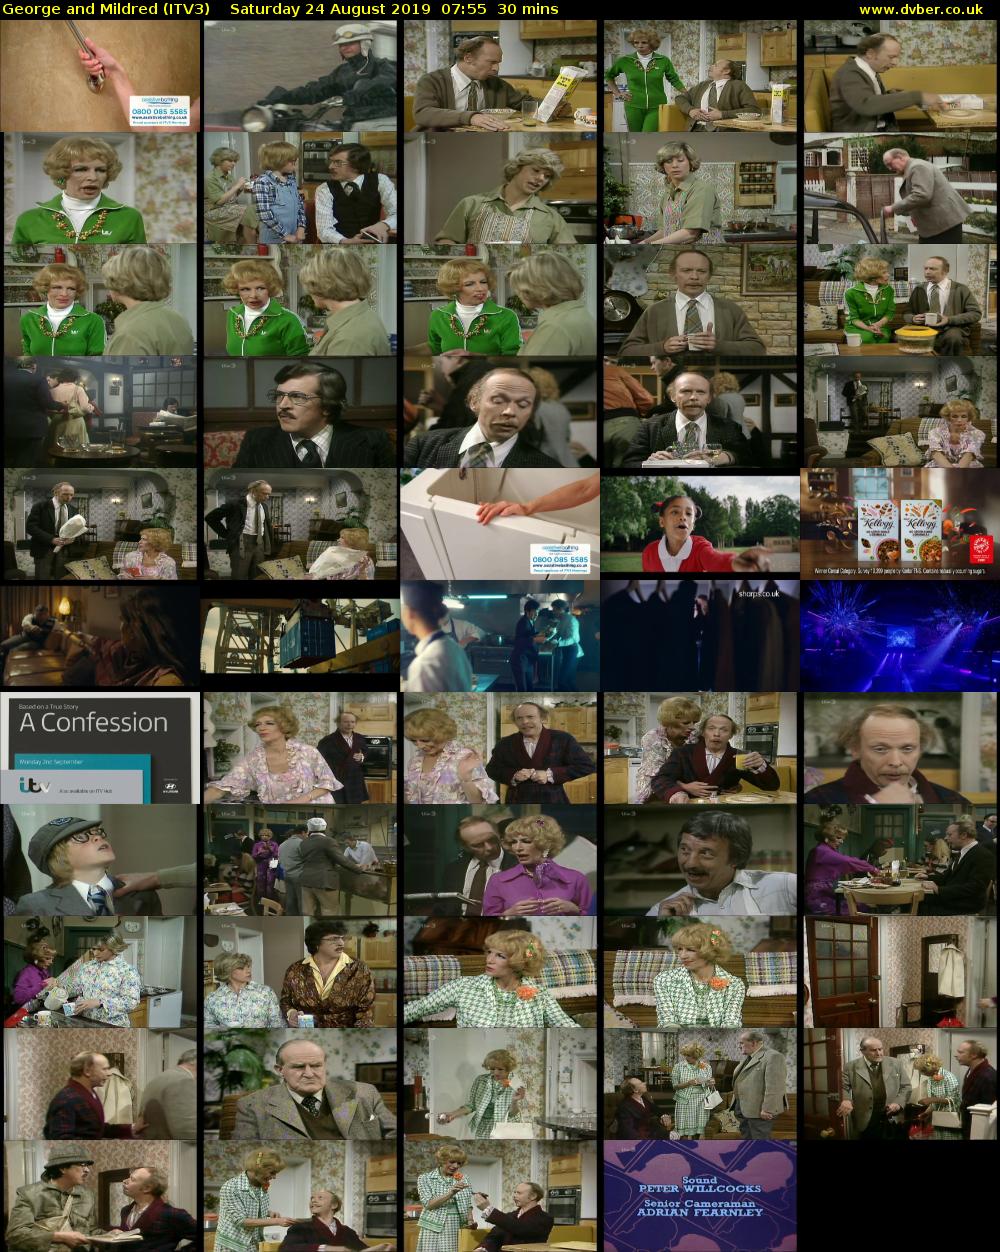 George and Mildred (ITV3) Saturday 24 August 2019 07:55 - 08:25